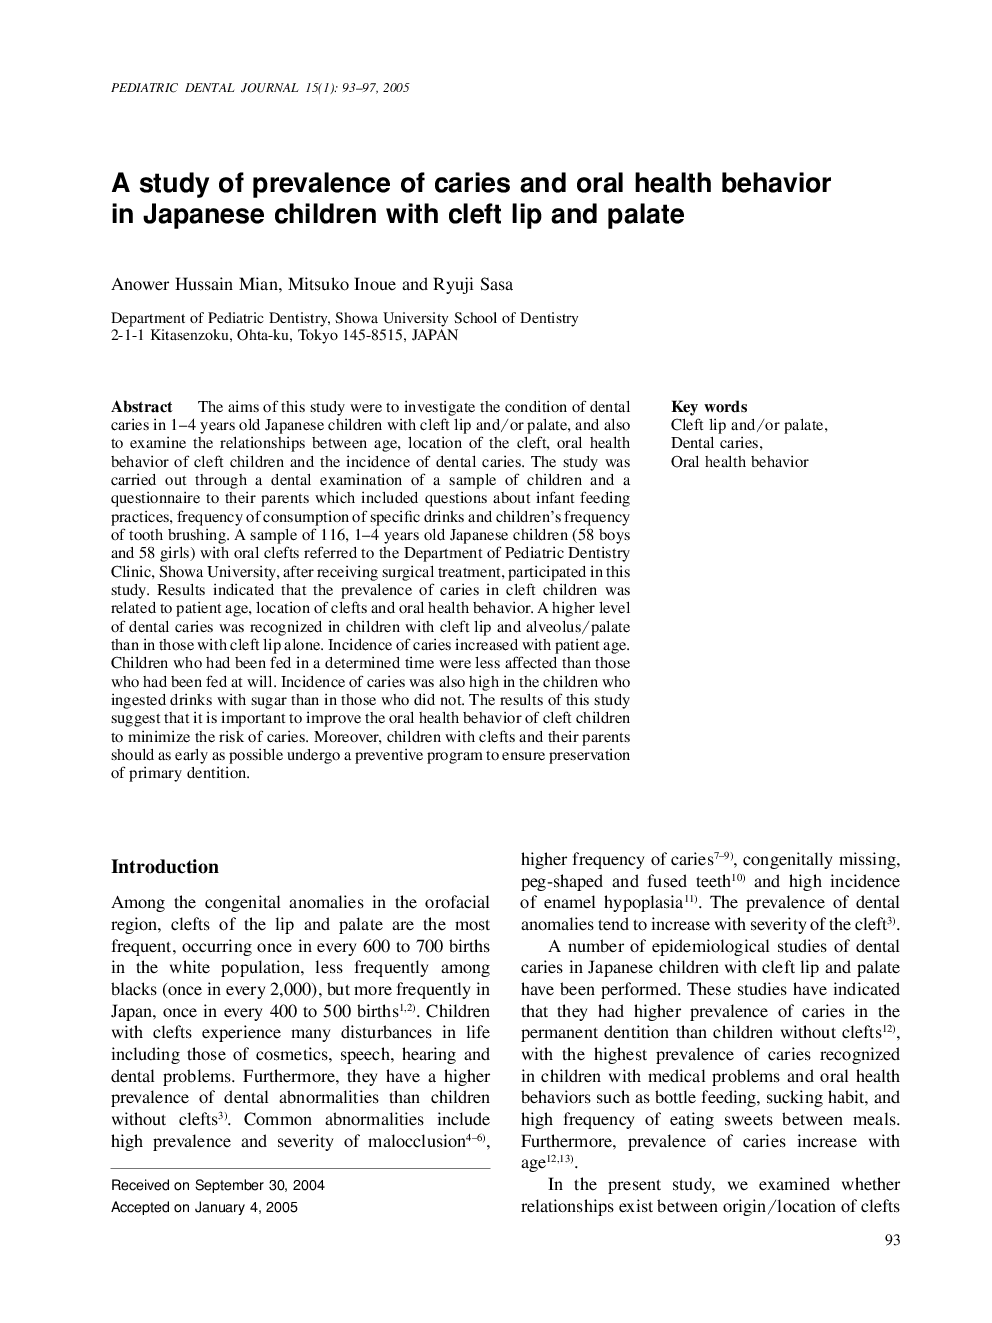 A study of prevalence of caries and oral health behavior in Japanese children with cleft lip and palate